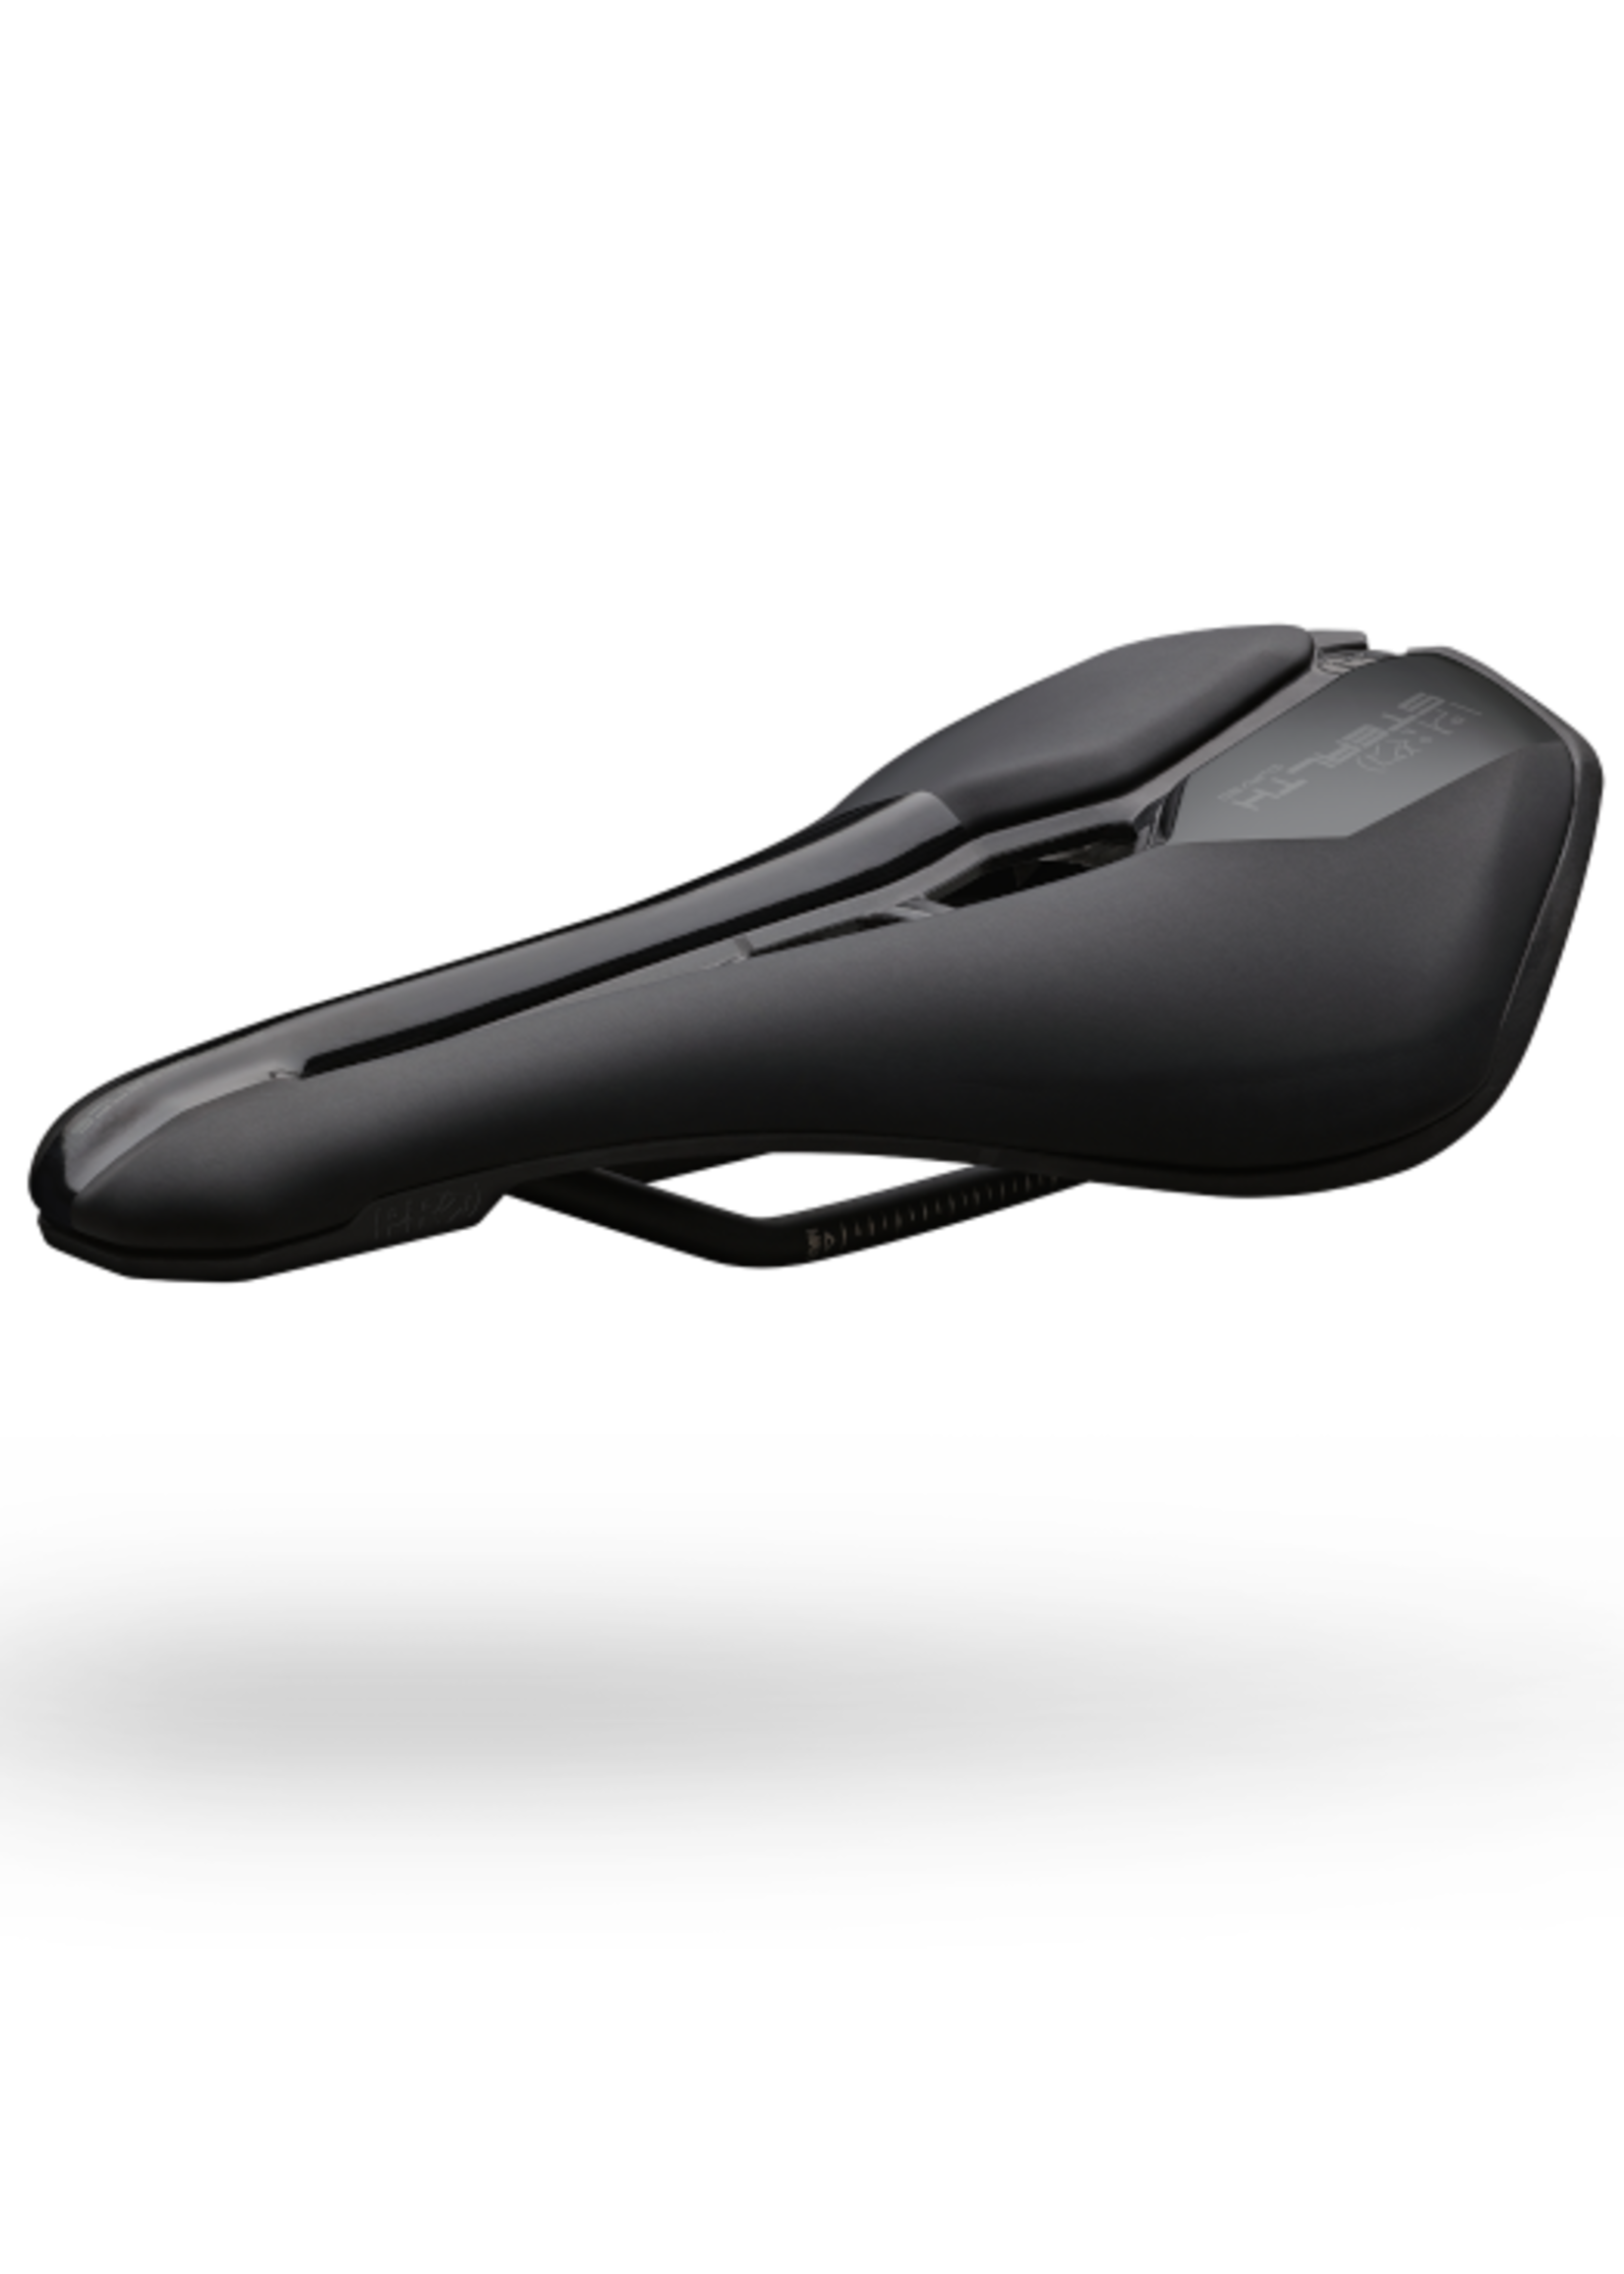 Pro PRO - Selle - Stealth Curved Performance - 152mm